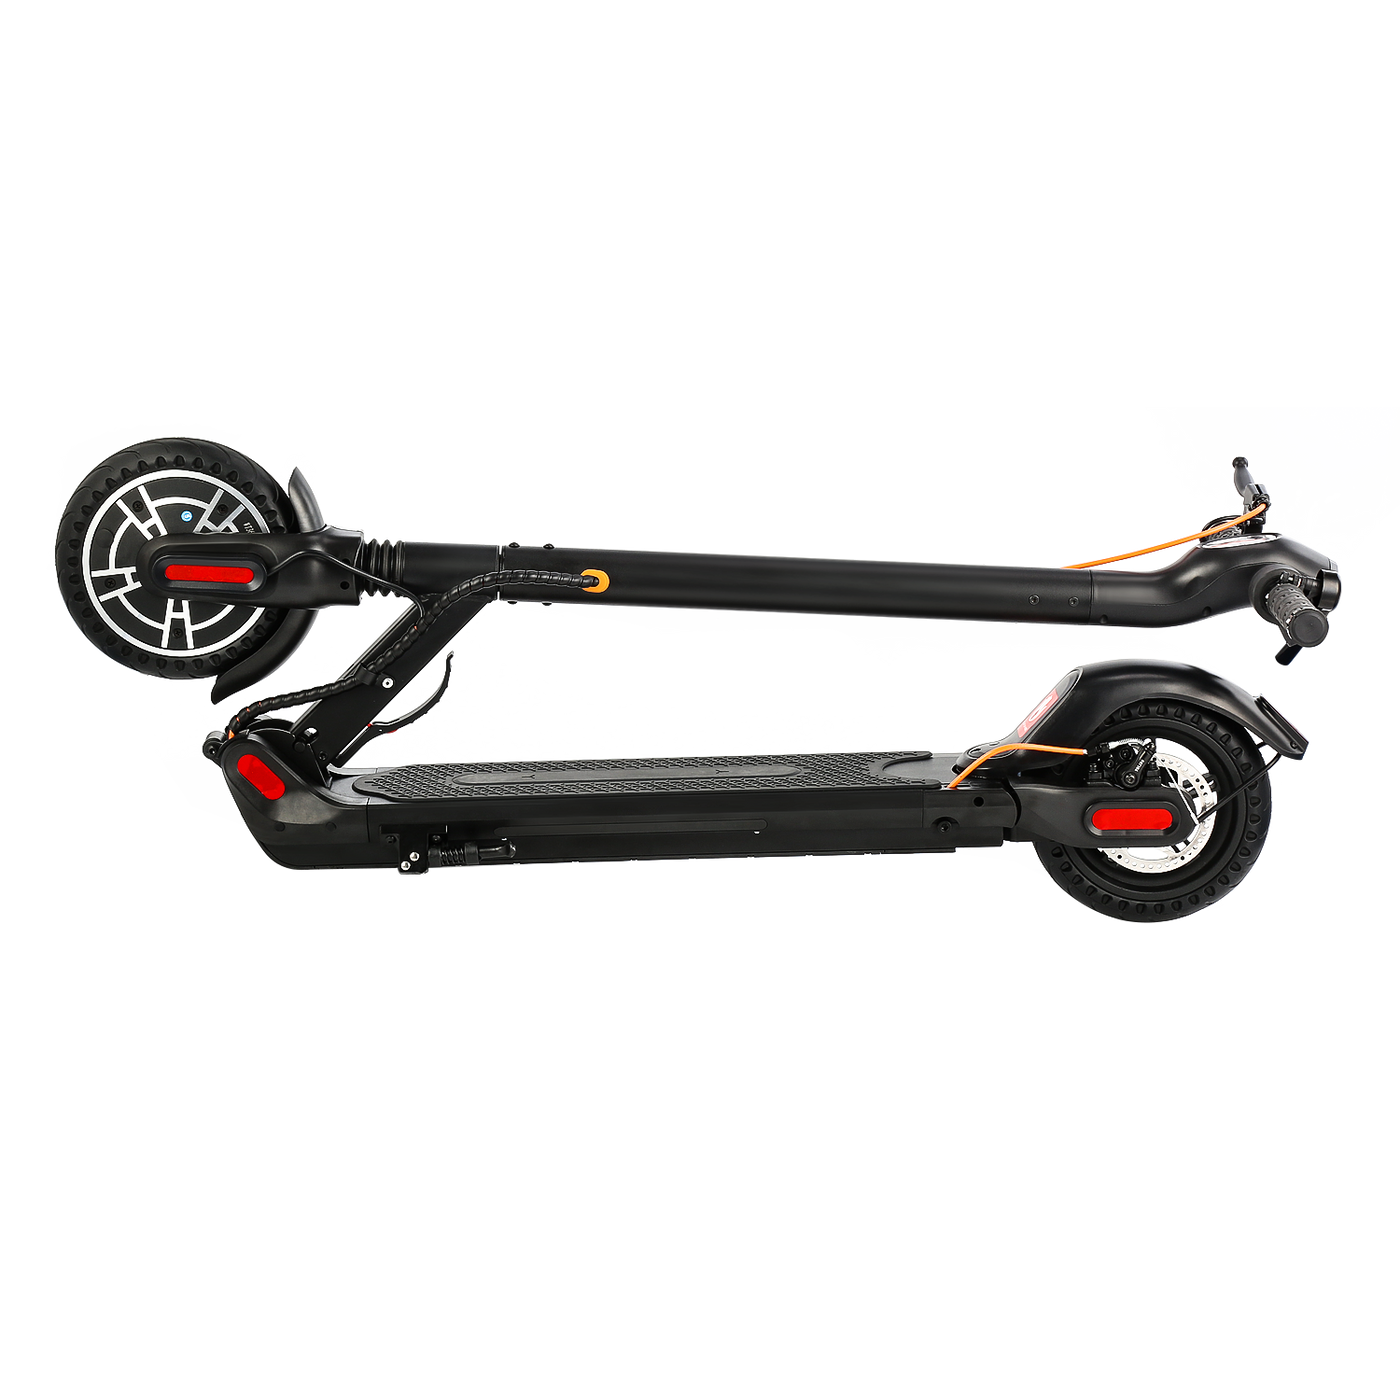 iScooter M5Pro Electric Scooter